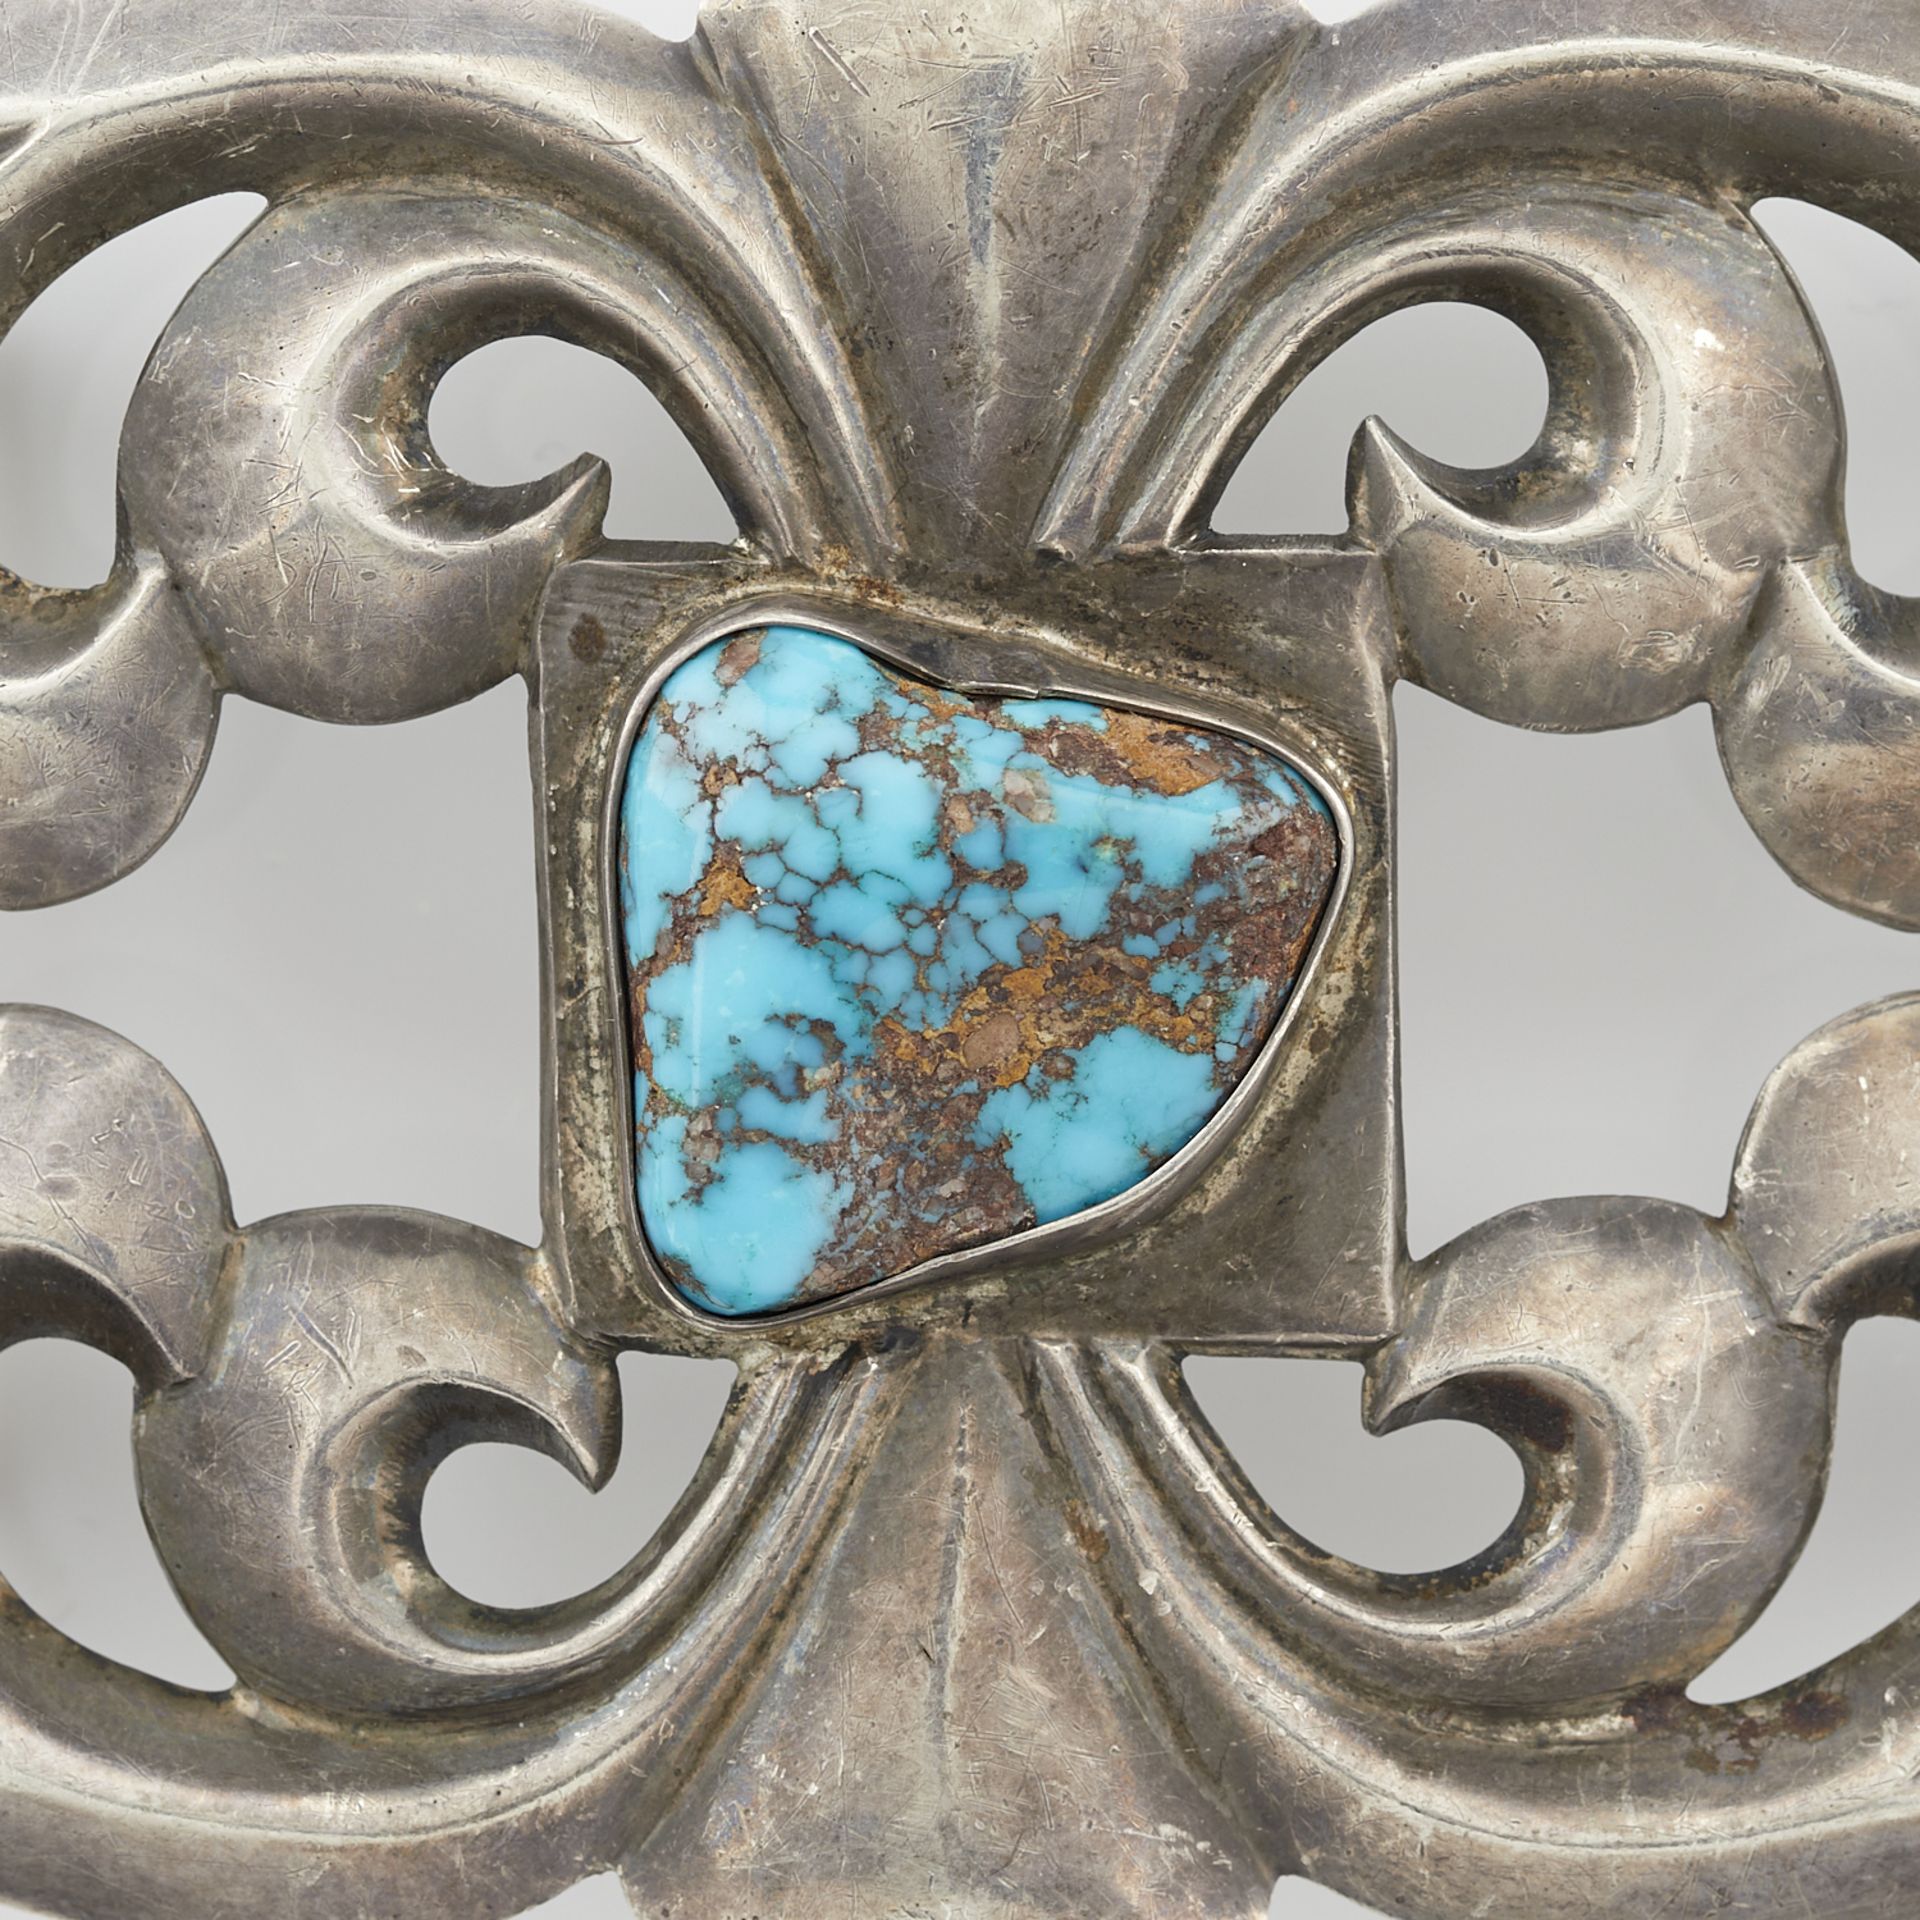 Large Sandcast Buckle w/ Turquoise - Image 5 of 7